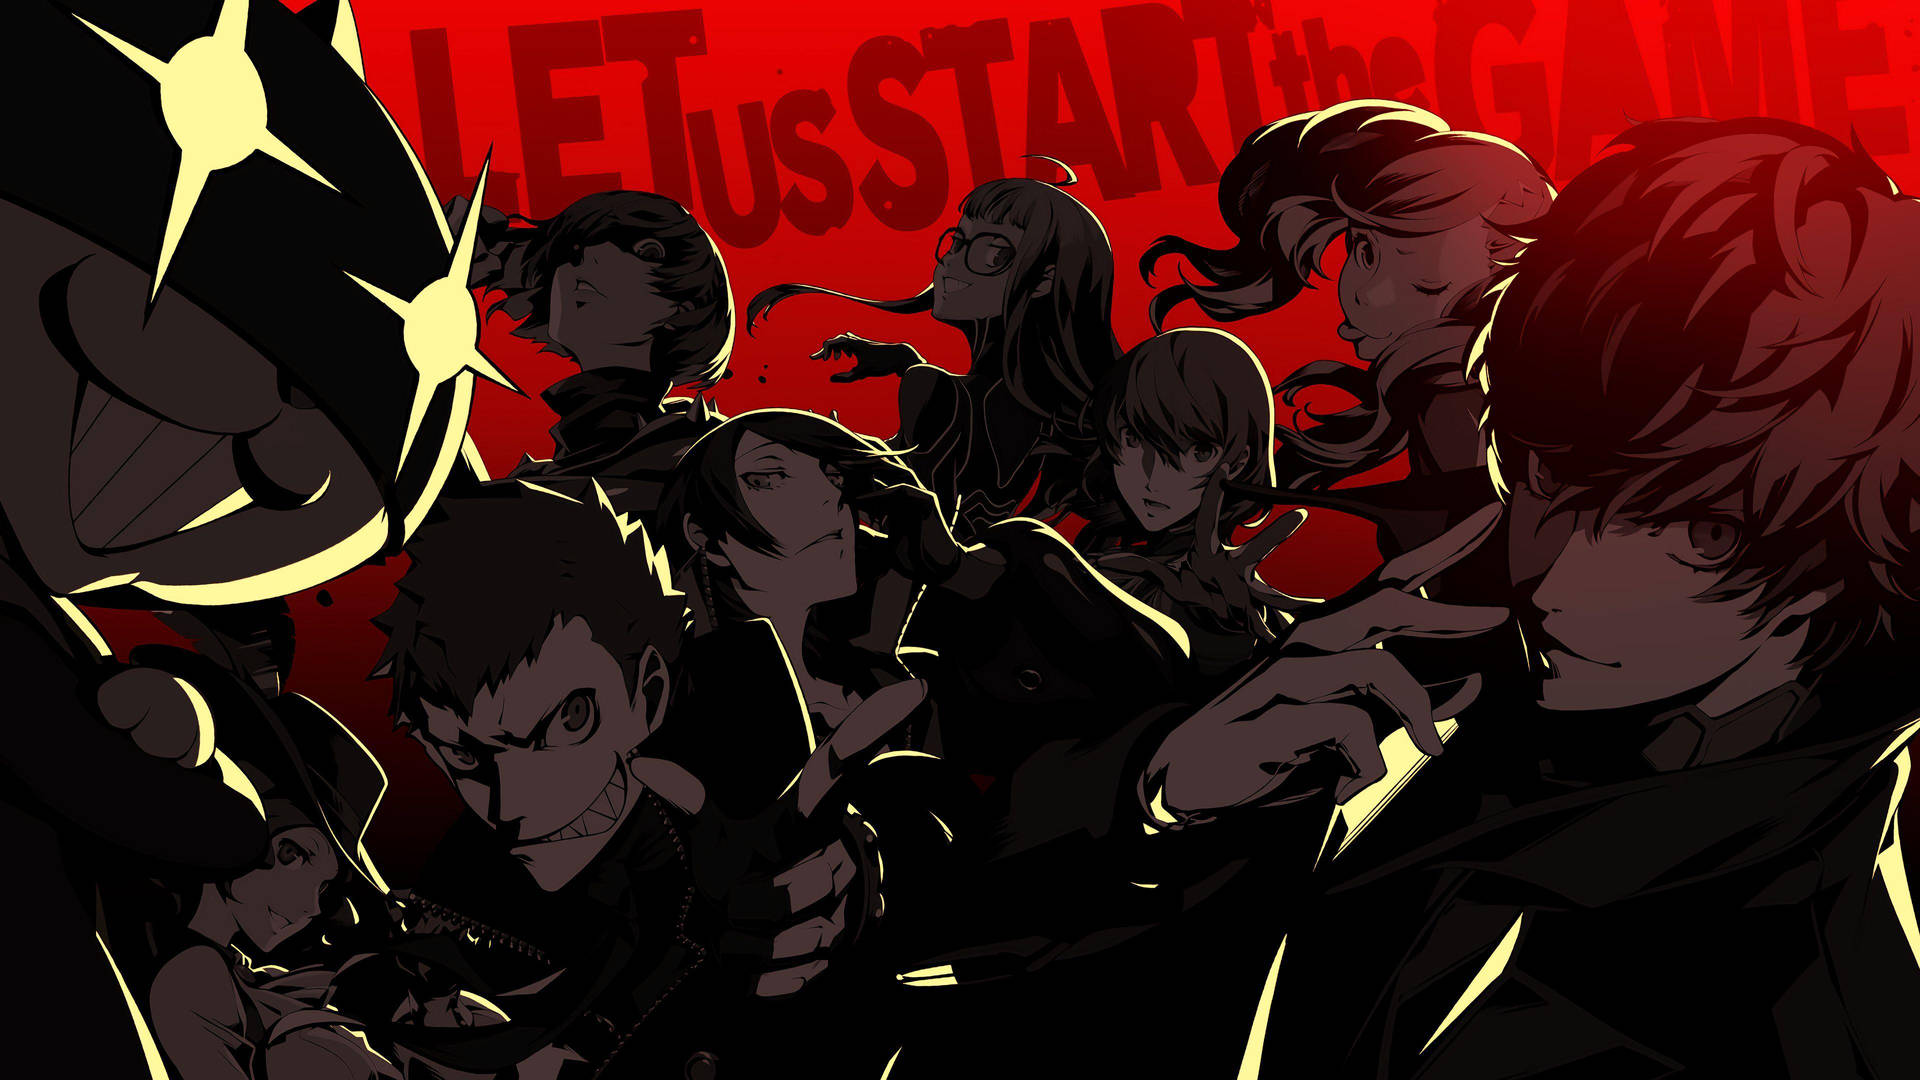 Persona 5 Royal Characters' Silhouettes Wallpaper